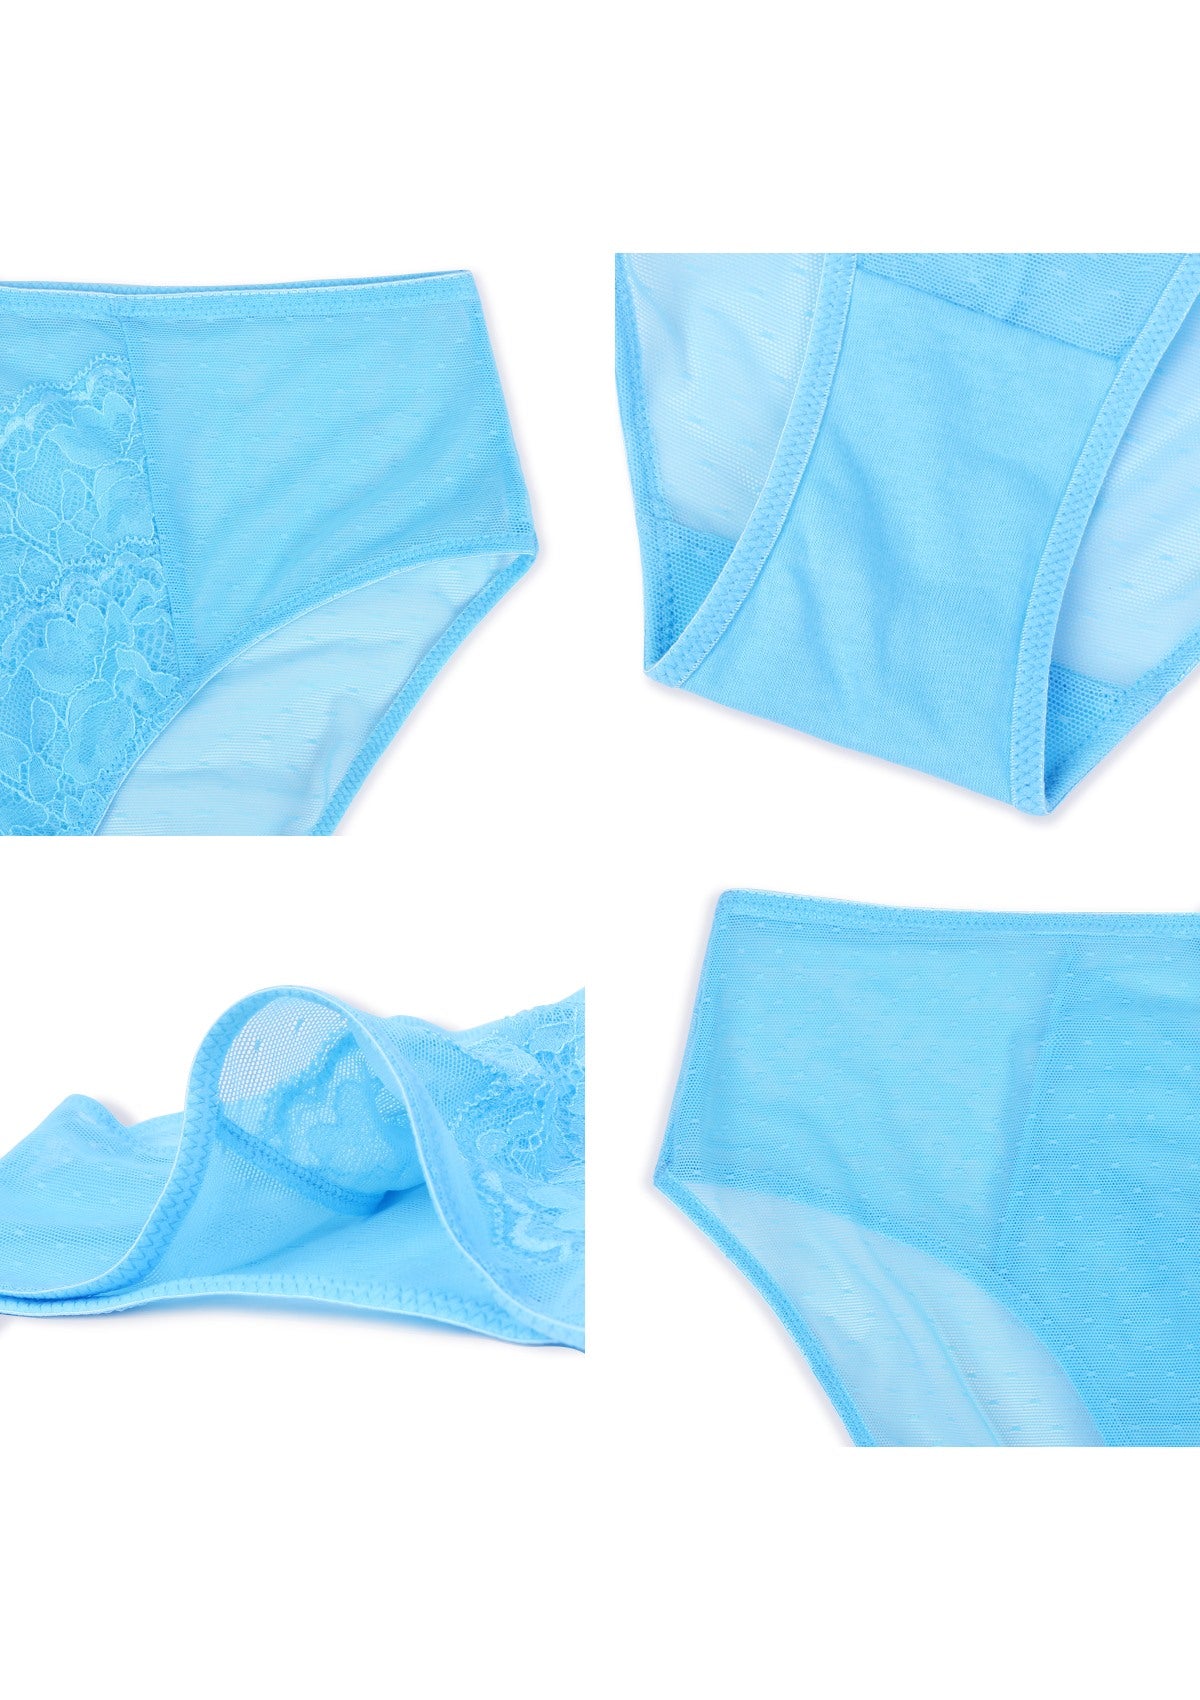 HSIA Enchante High-Rise Floral Lacy Panty-Comfort In Style - L / Capri Blue